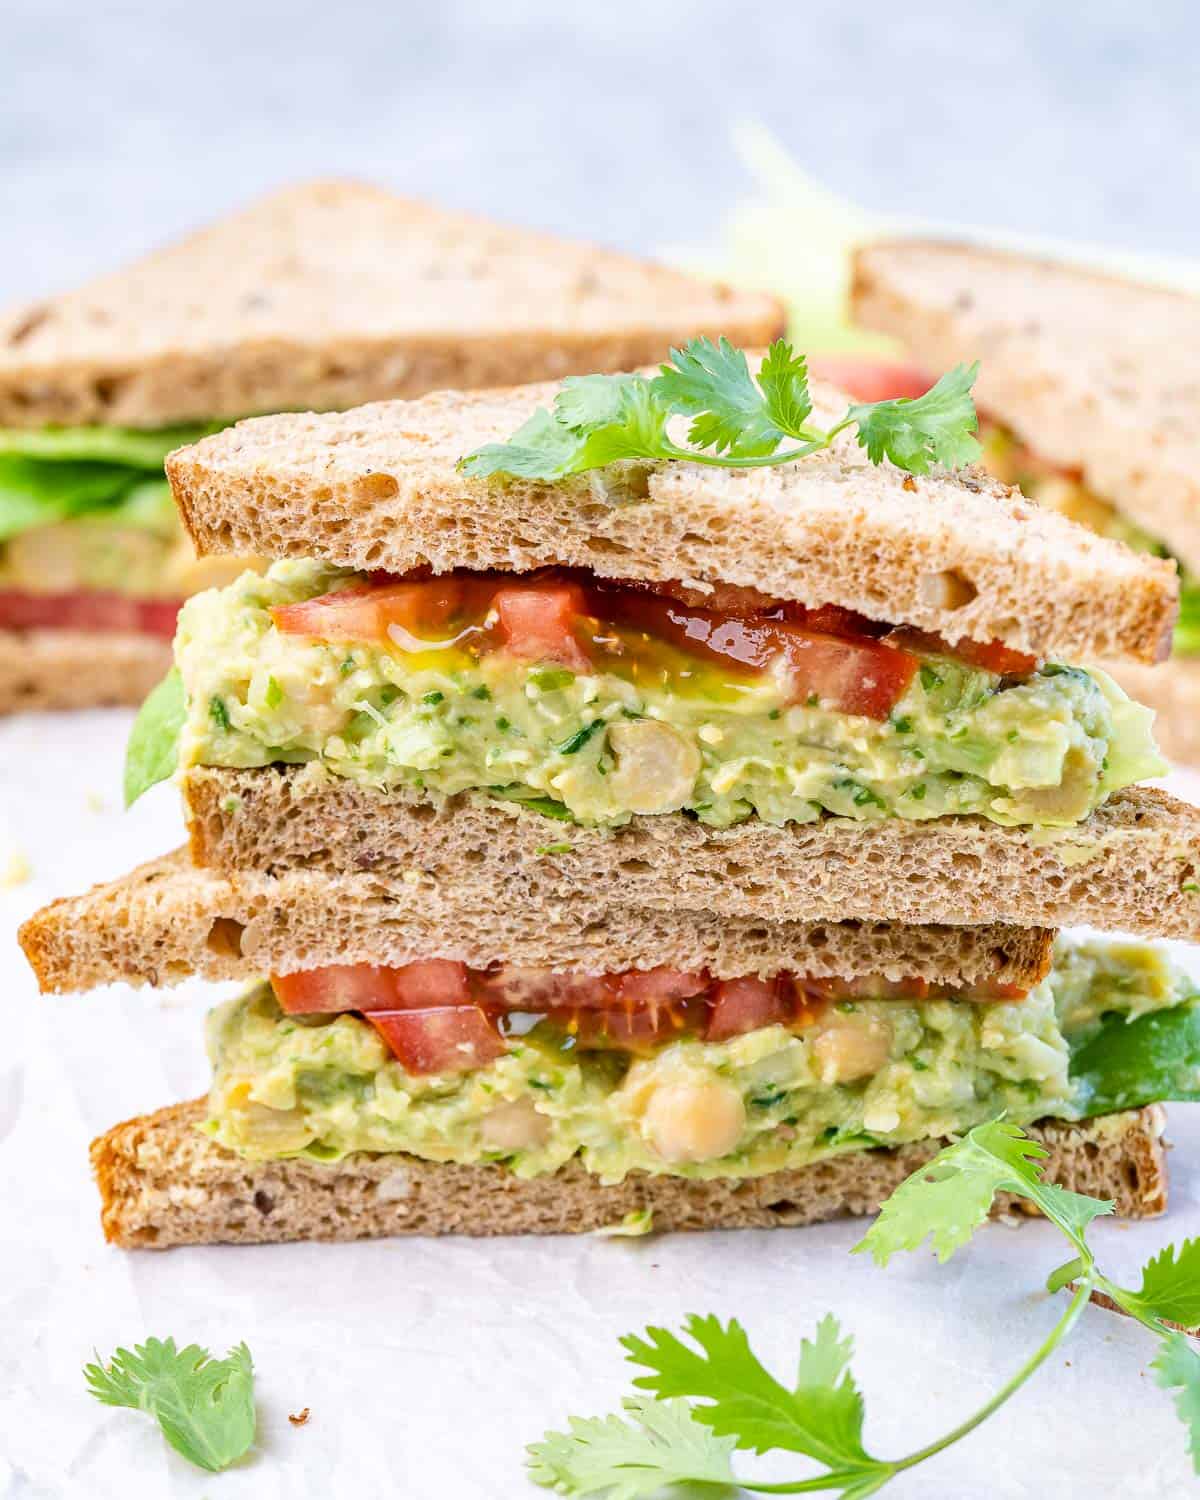 avocado salad with chickpeas on bread slices with tomato